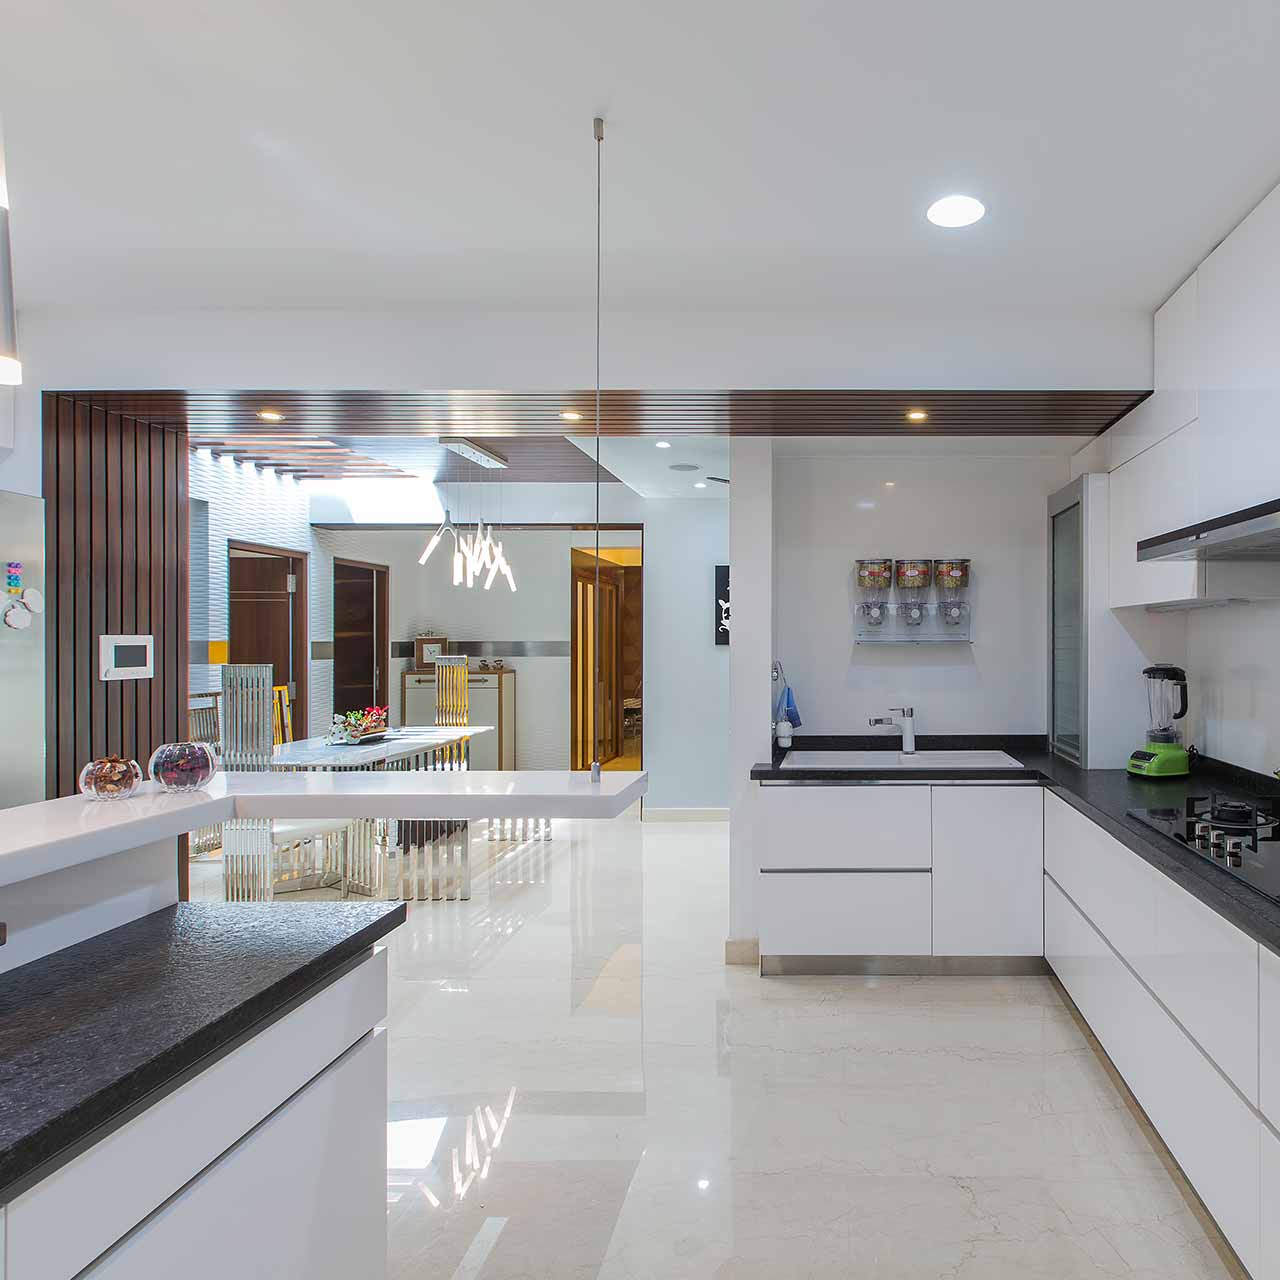 Open kitchen layout is popular among all other types of kitchen layouts and open concept kitchen is ideal for small homes